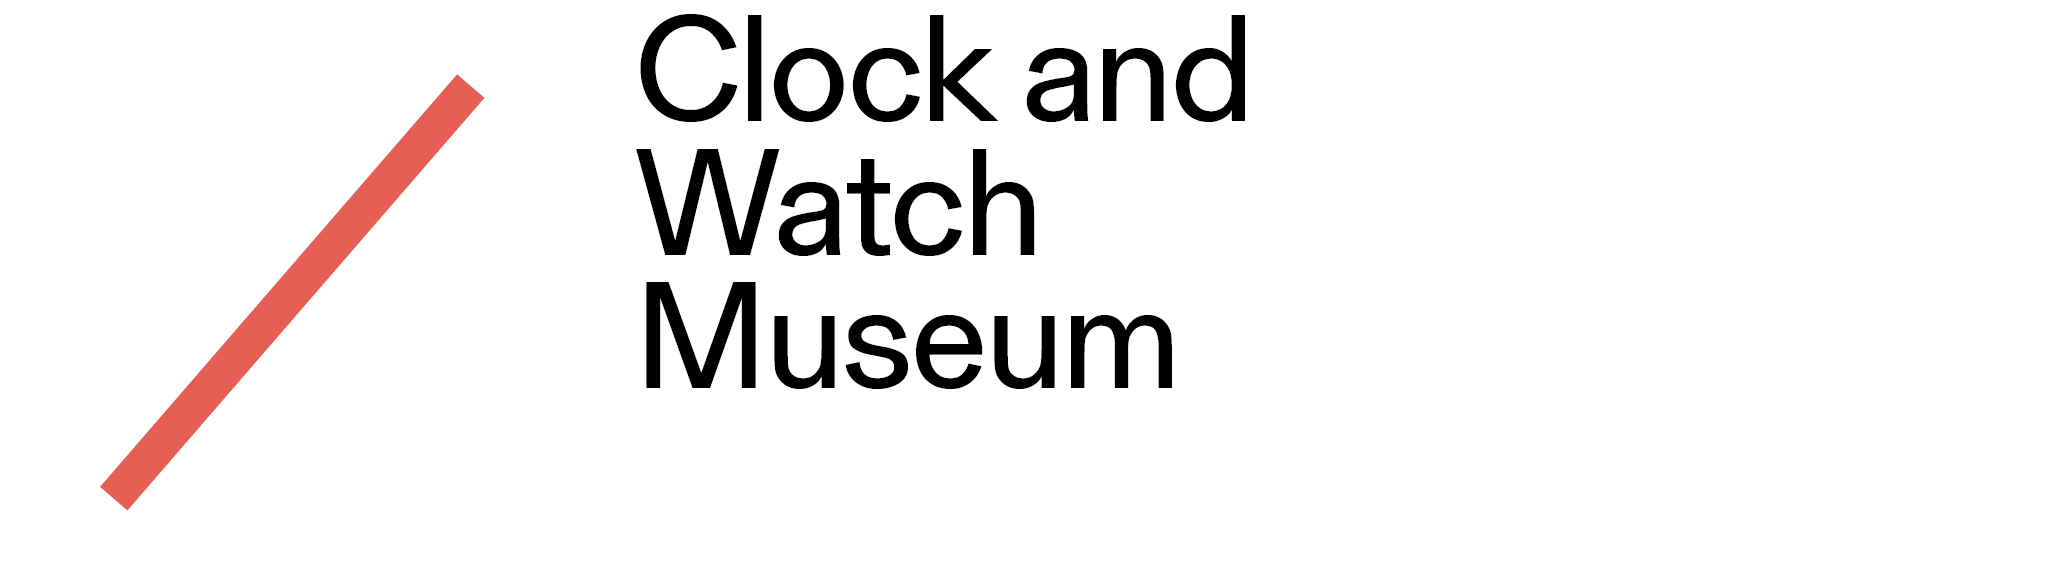 Clock and Watch Museum